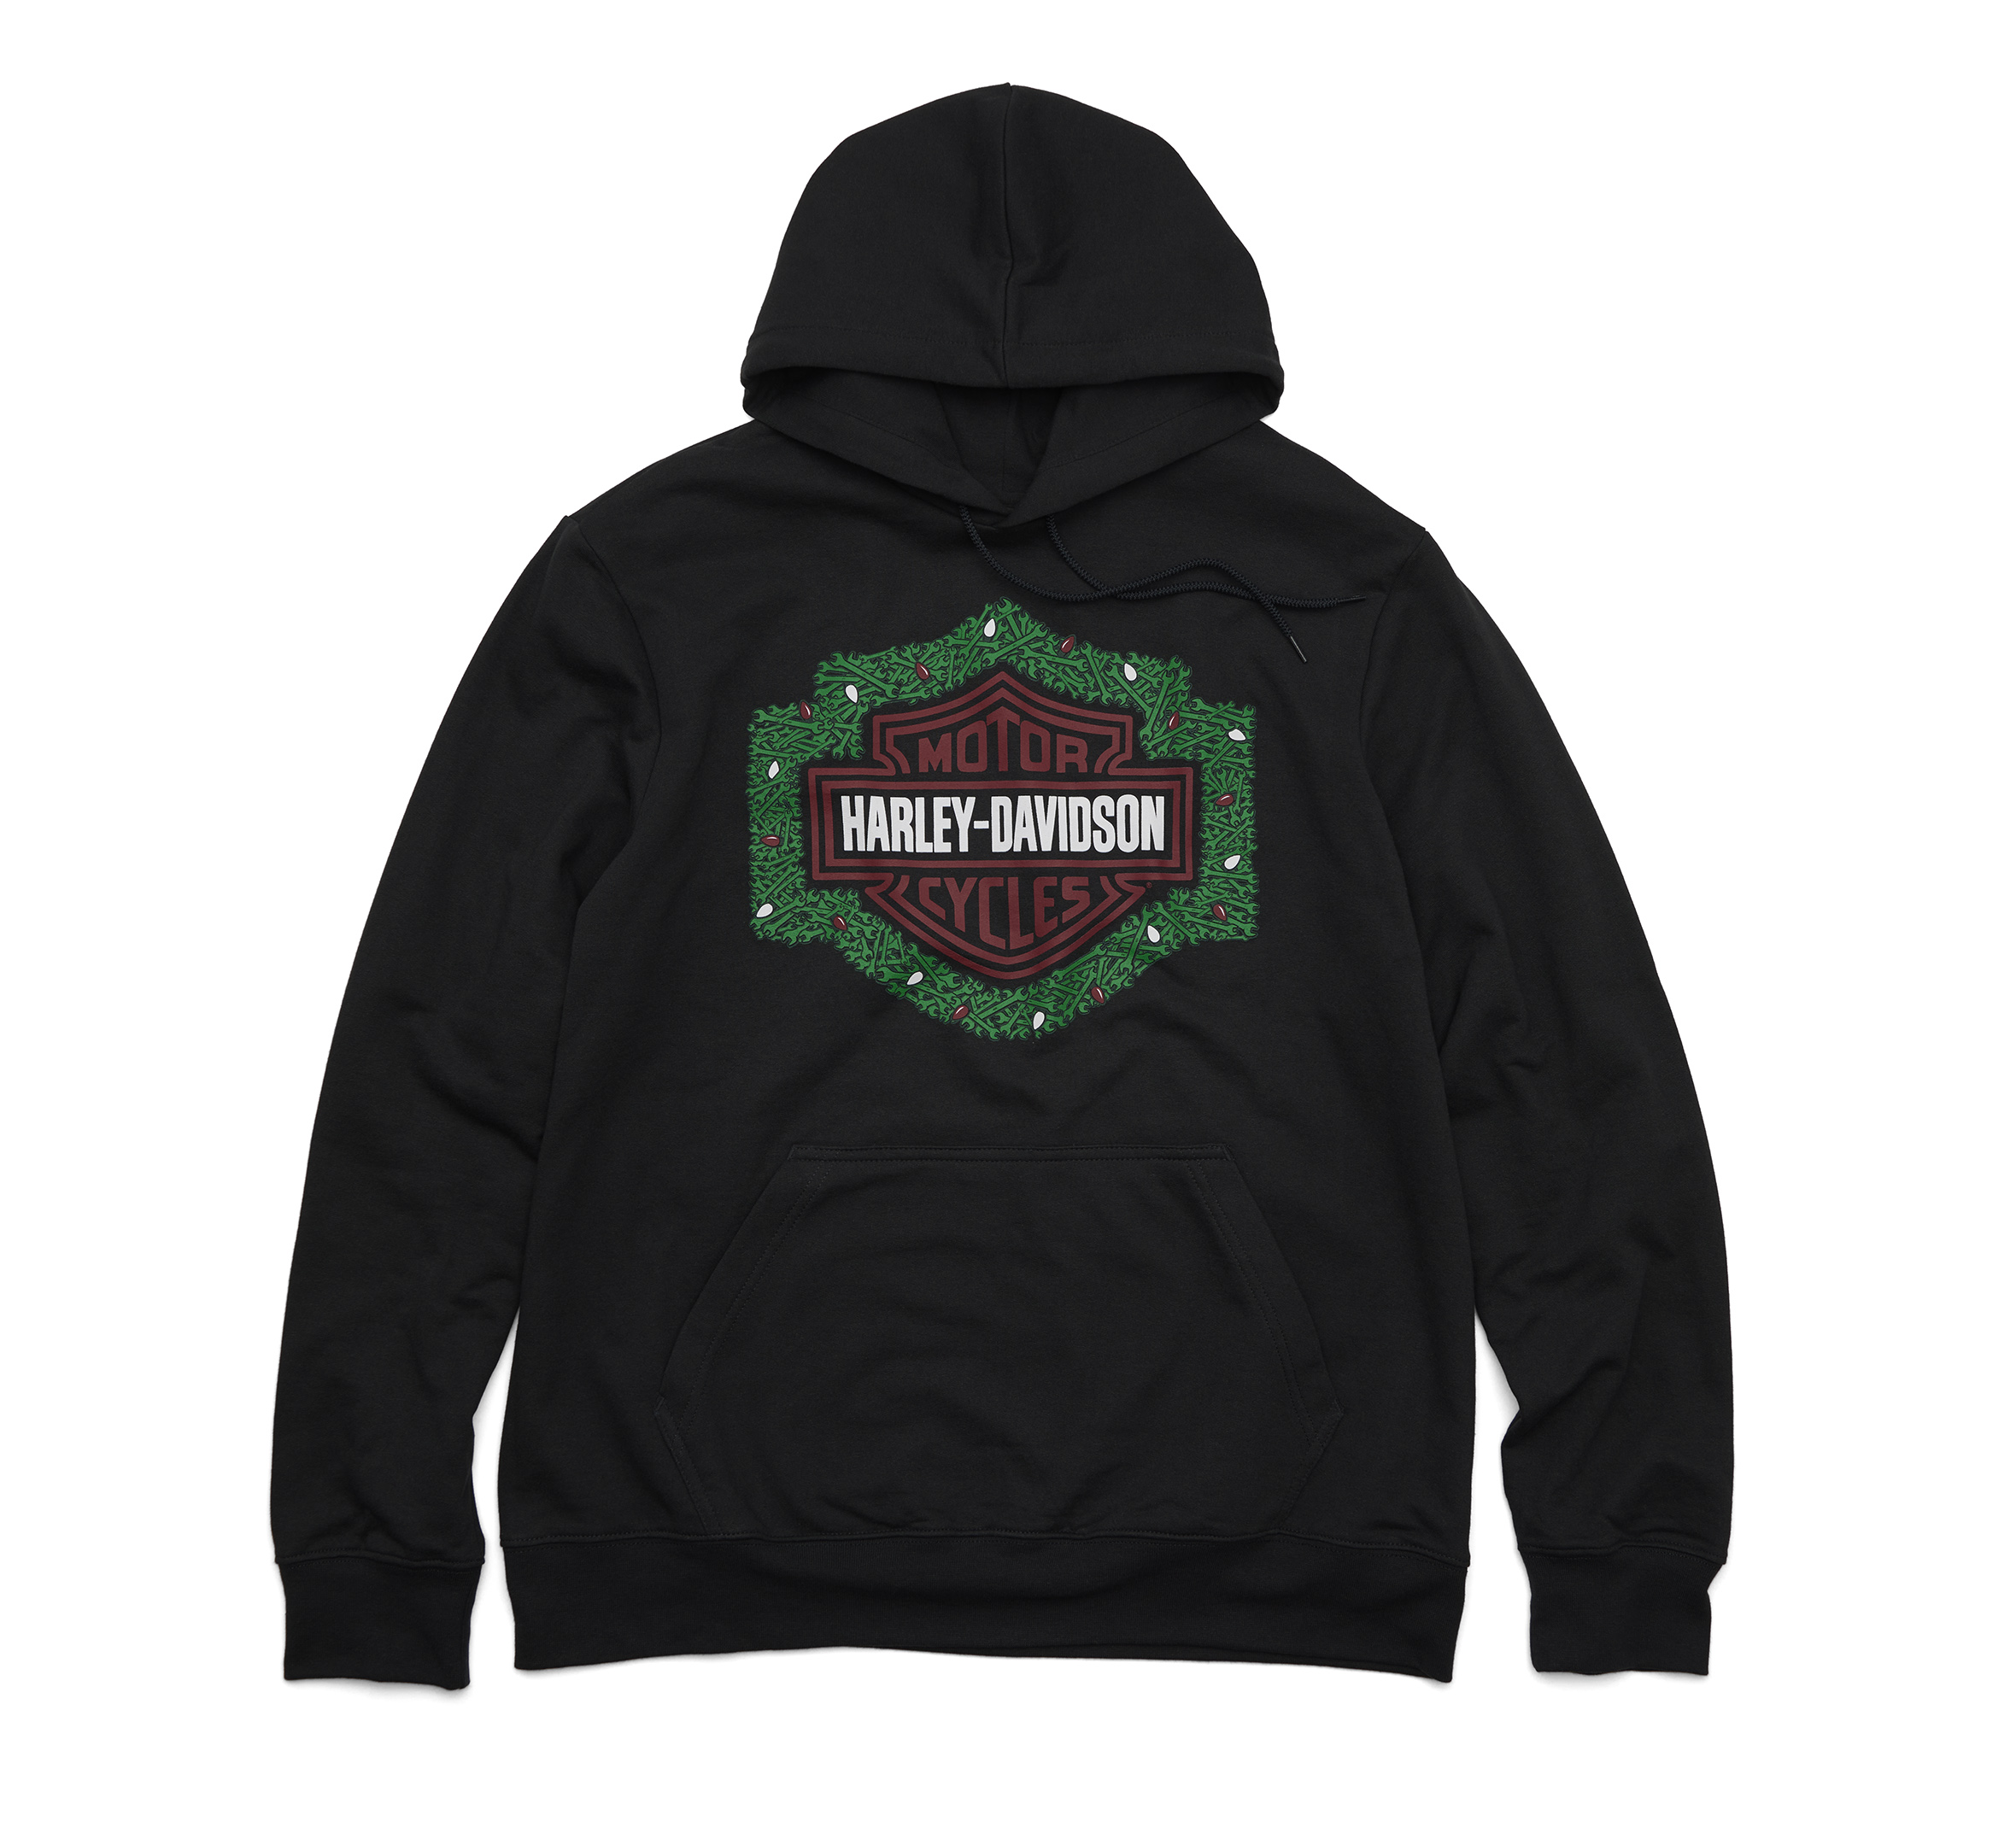 Men's Wreath of Wrenches Pullover Hoodie 1